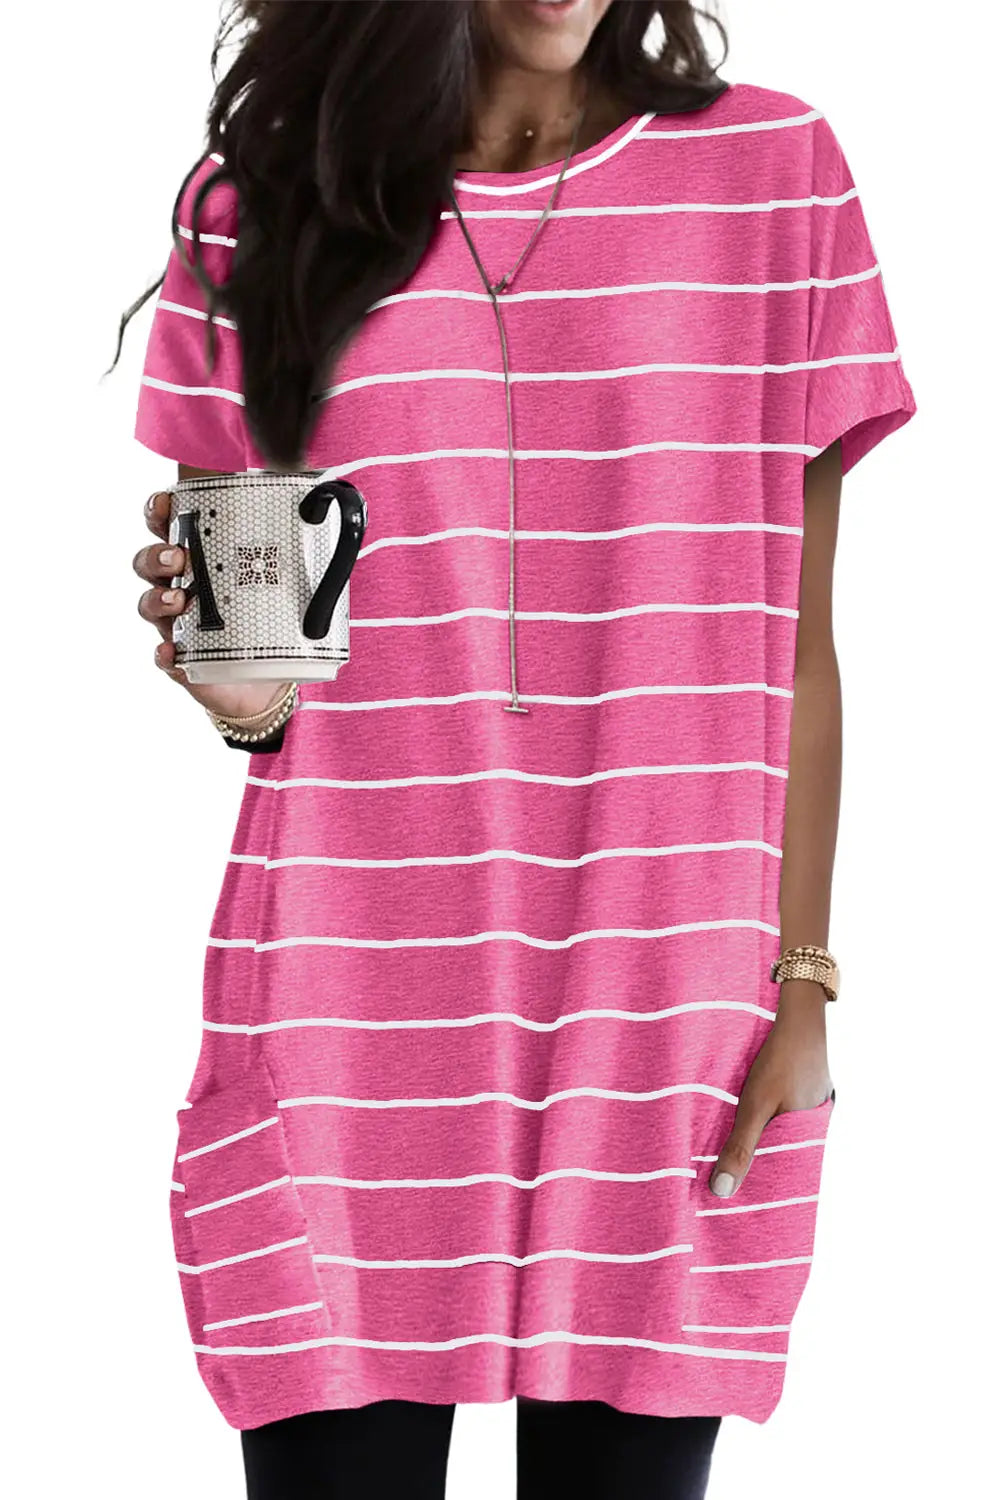 Rose striped print side pockets short sleeve tunic top - t-shirts